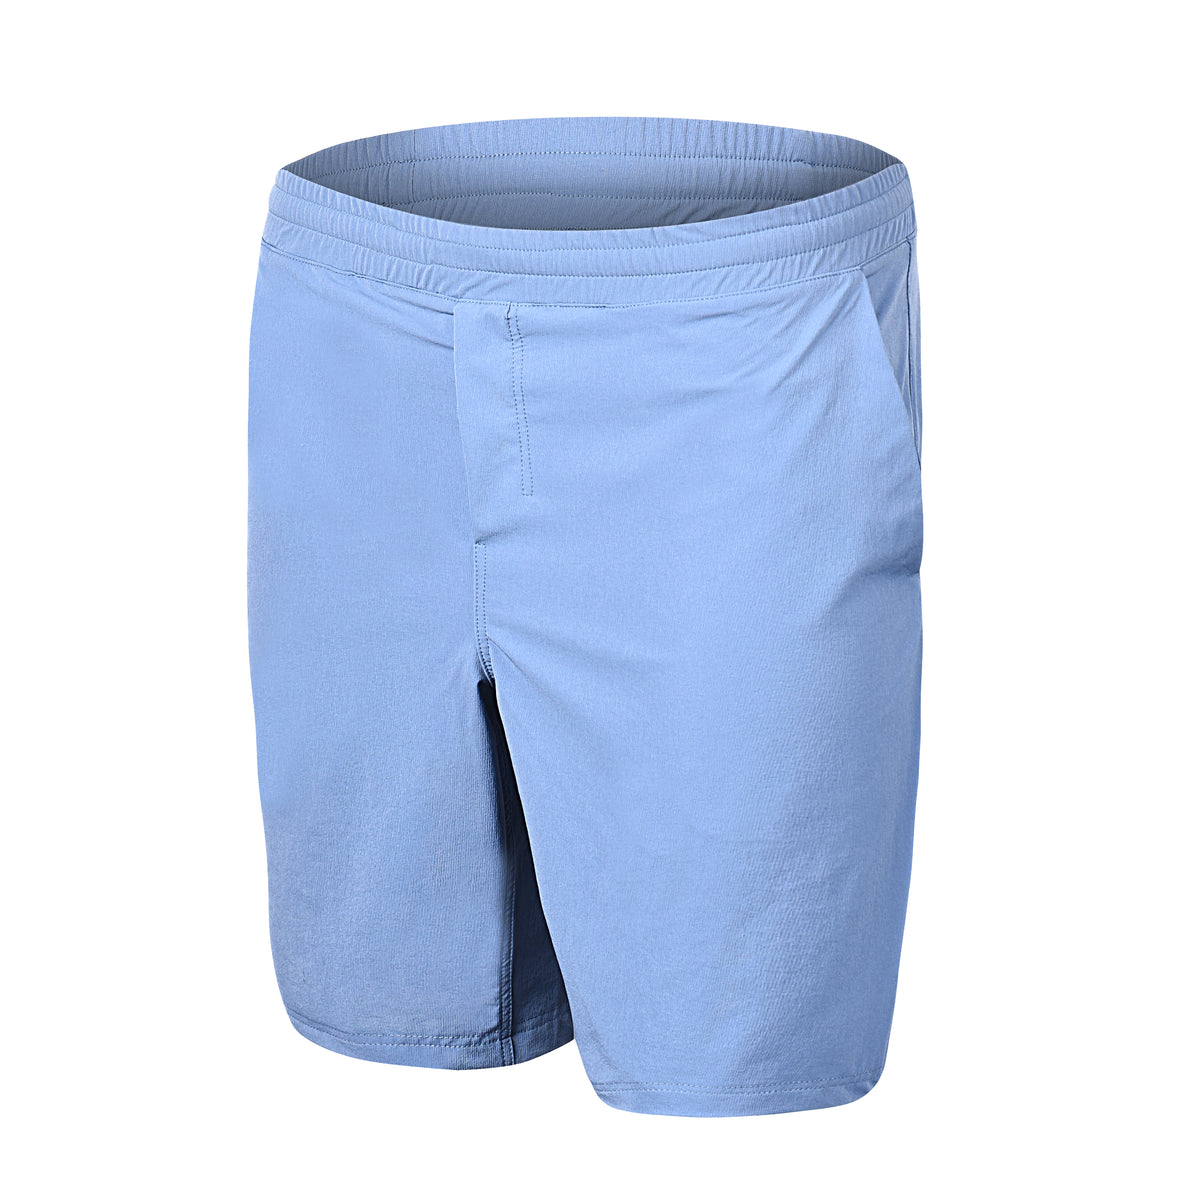 Comfy and quickdry men's workout shorts "Sandbech" - IAM3F